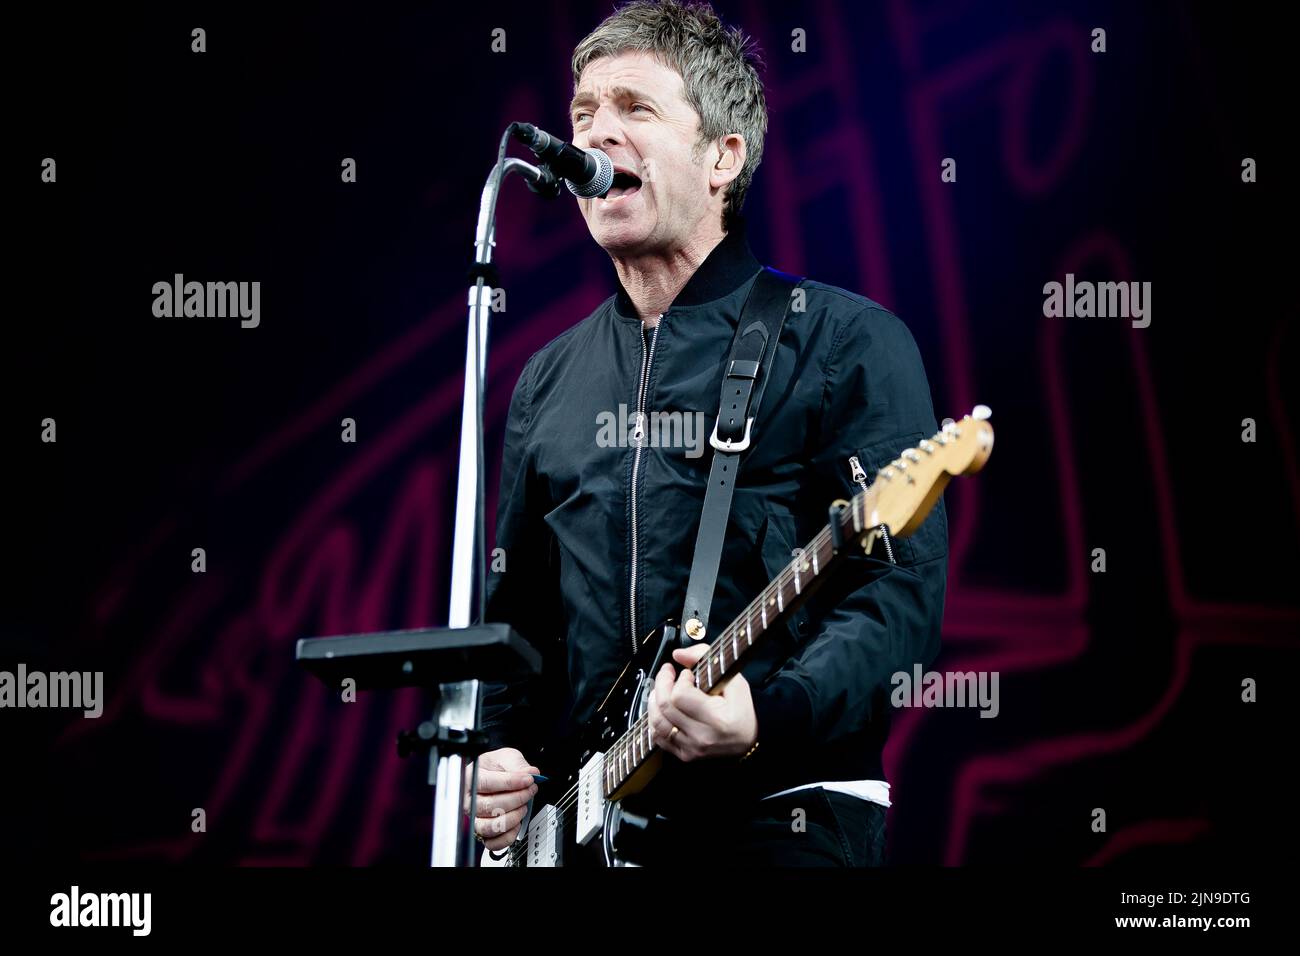 Noel Gallagher on stage during his performance at Eirias Stadium in Colwyn Bay, North Wales on 18th June 2022. Stock Photo